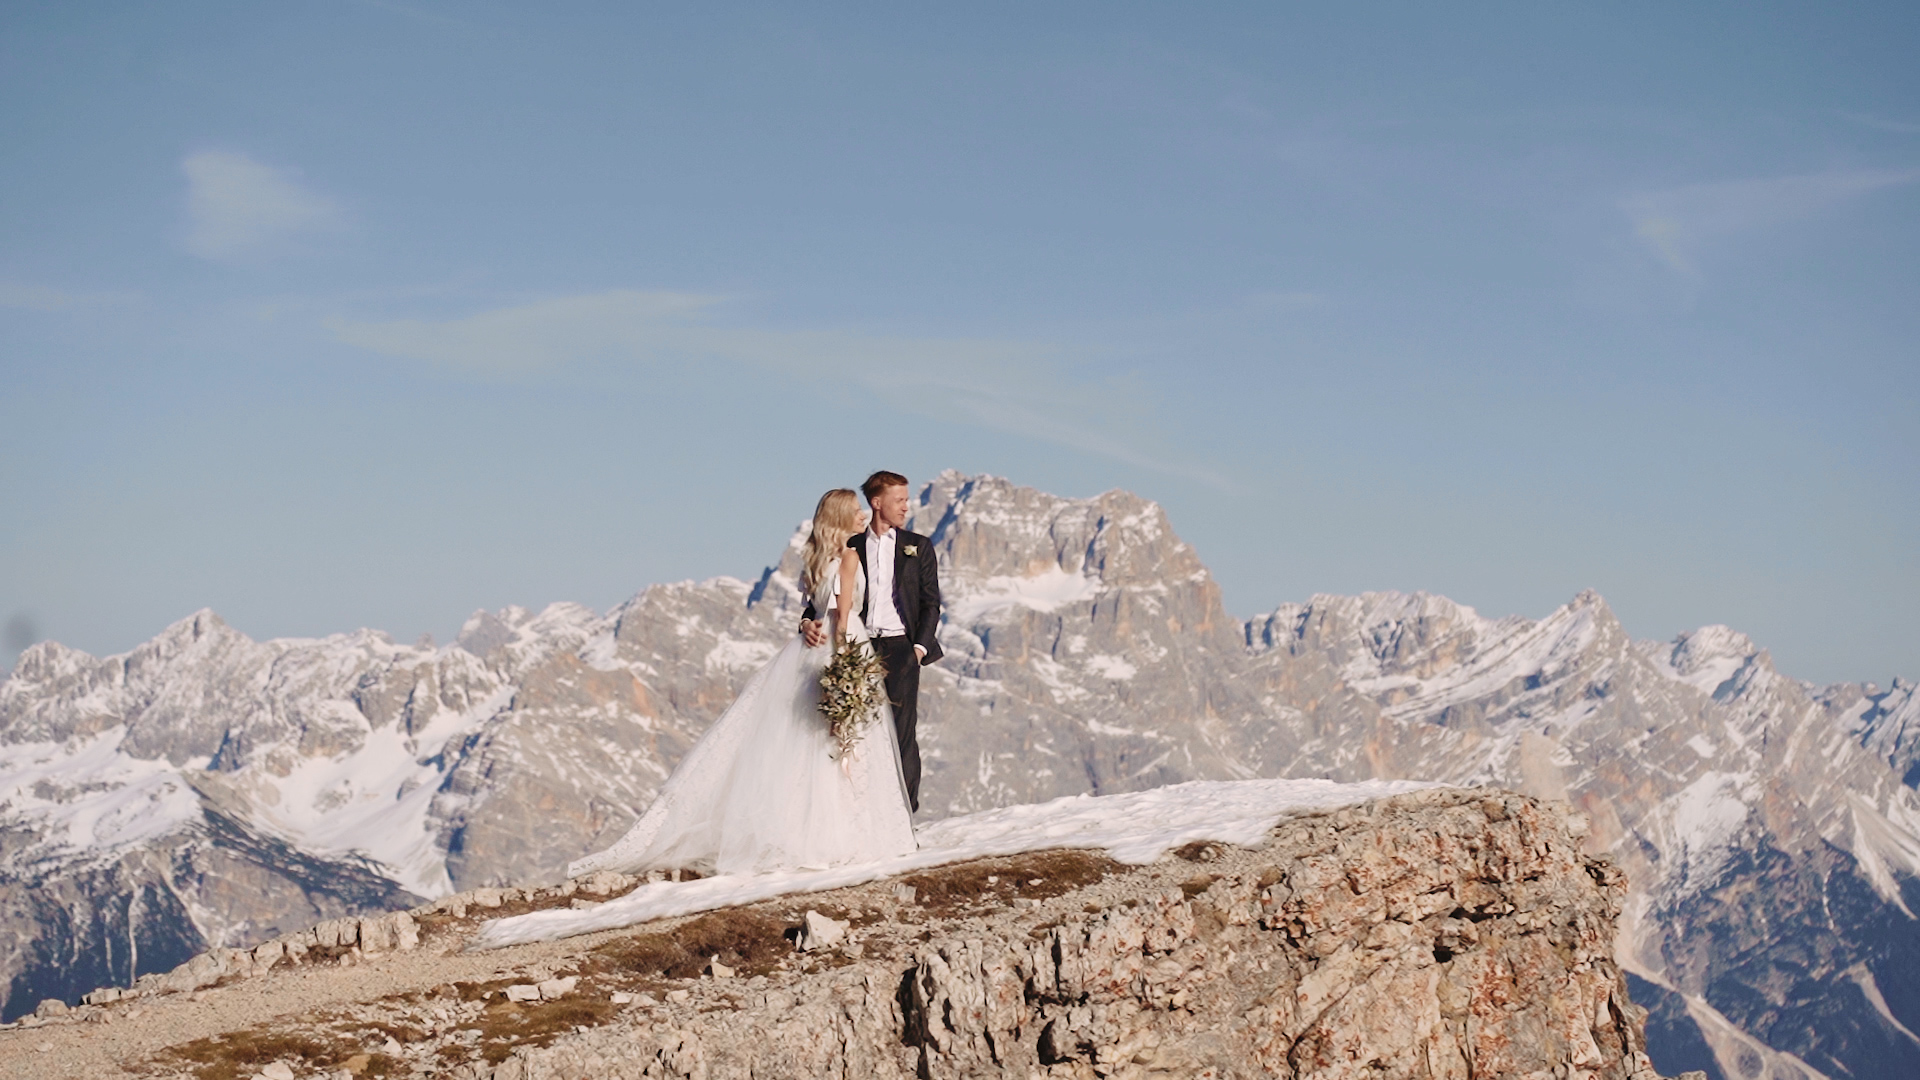 One of our elopement wedding in Italy